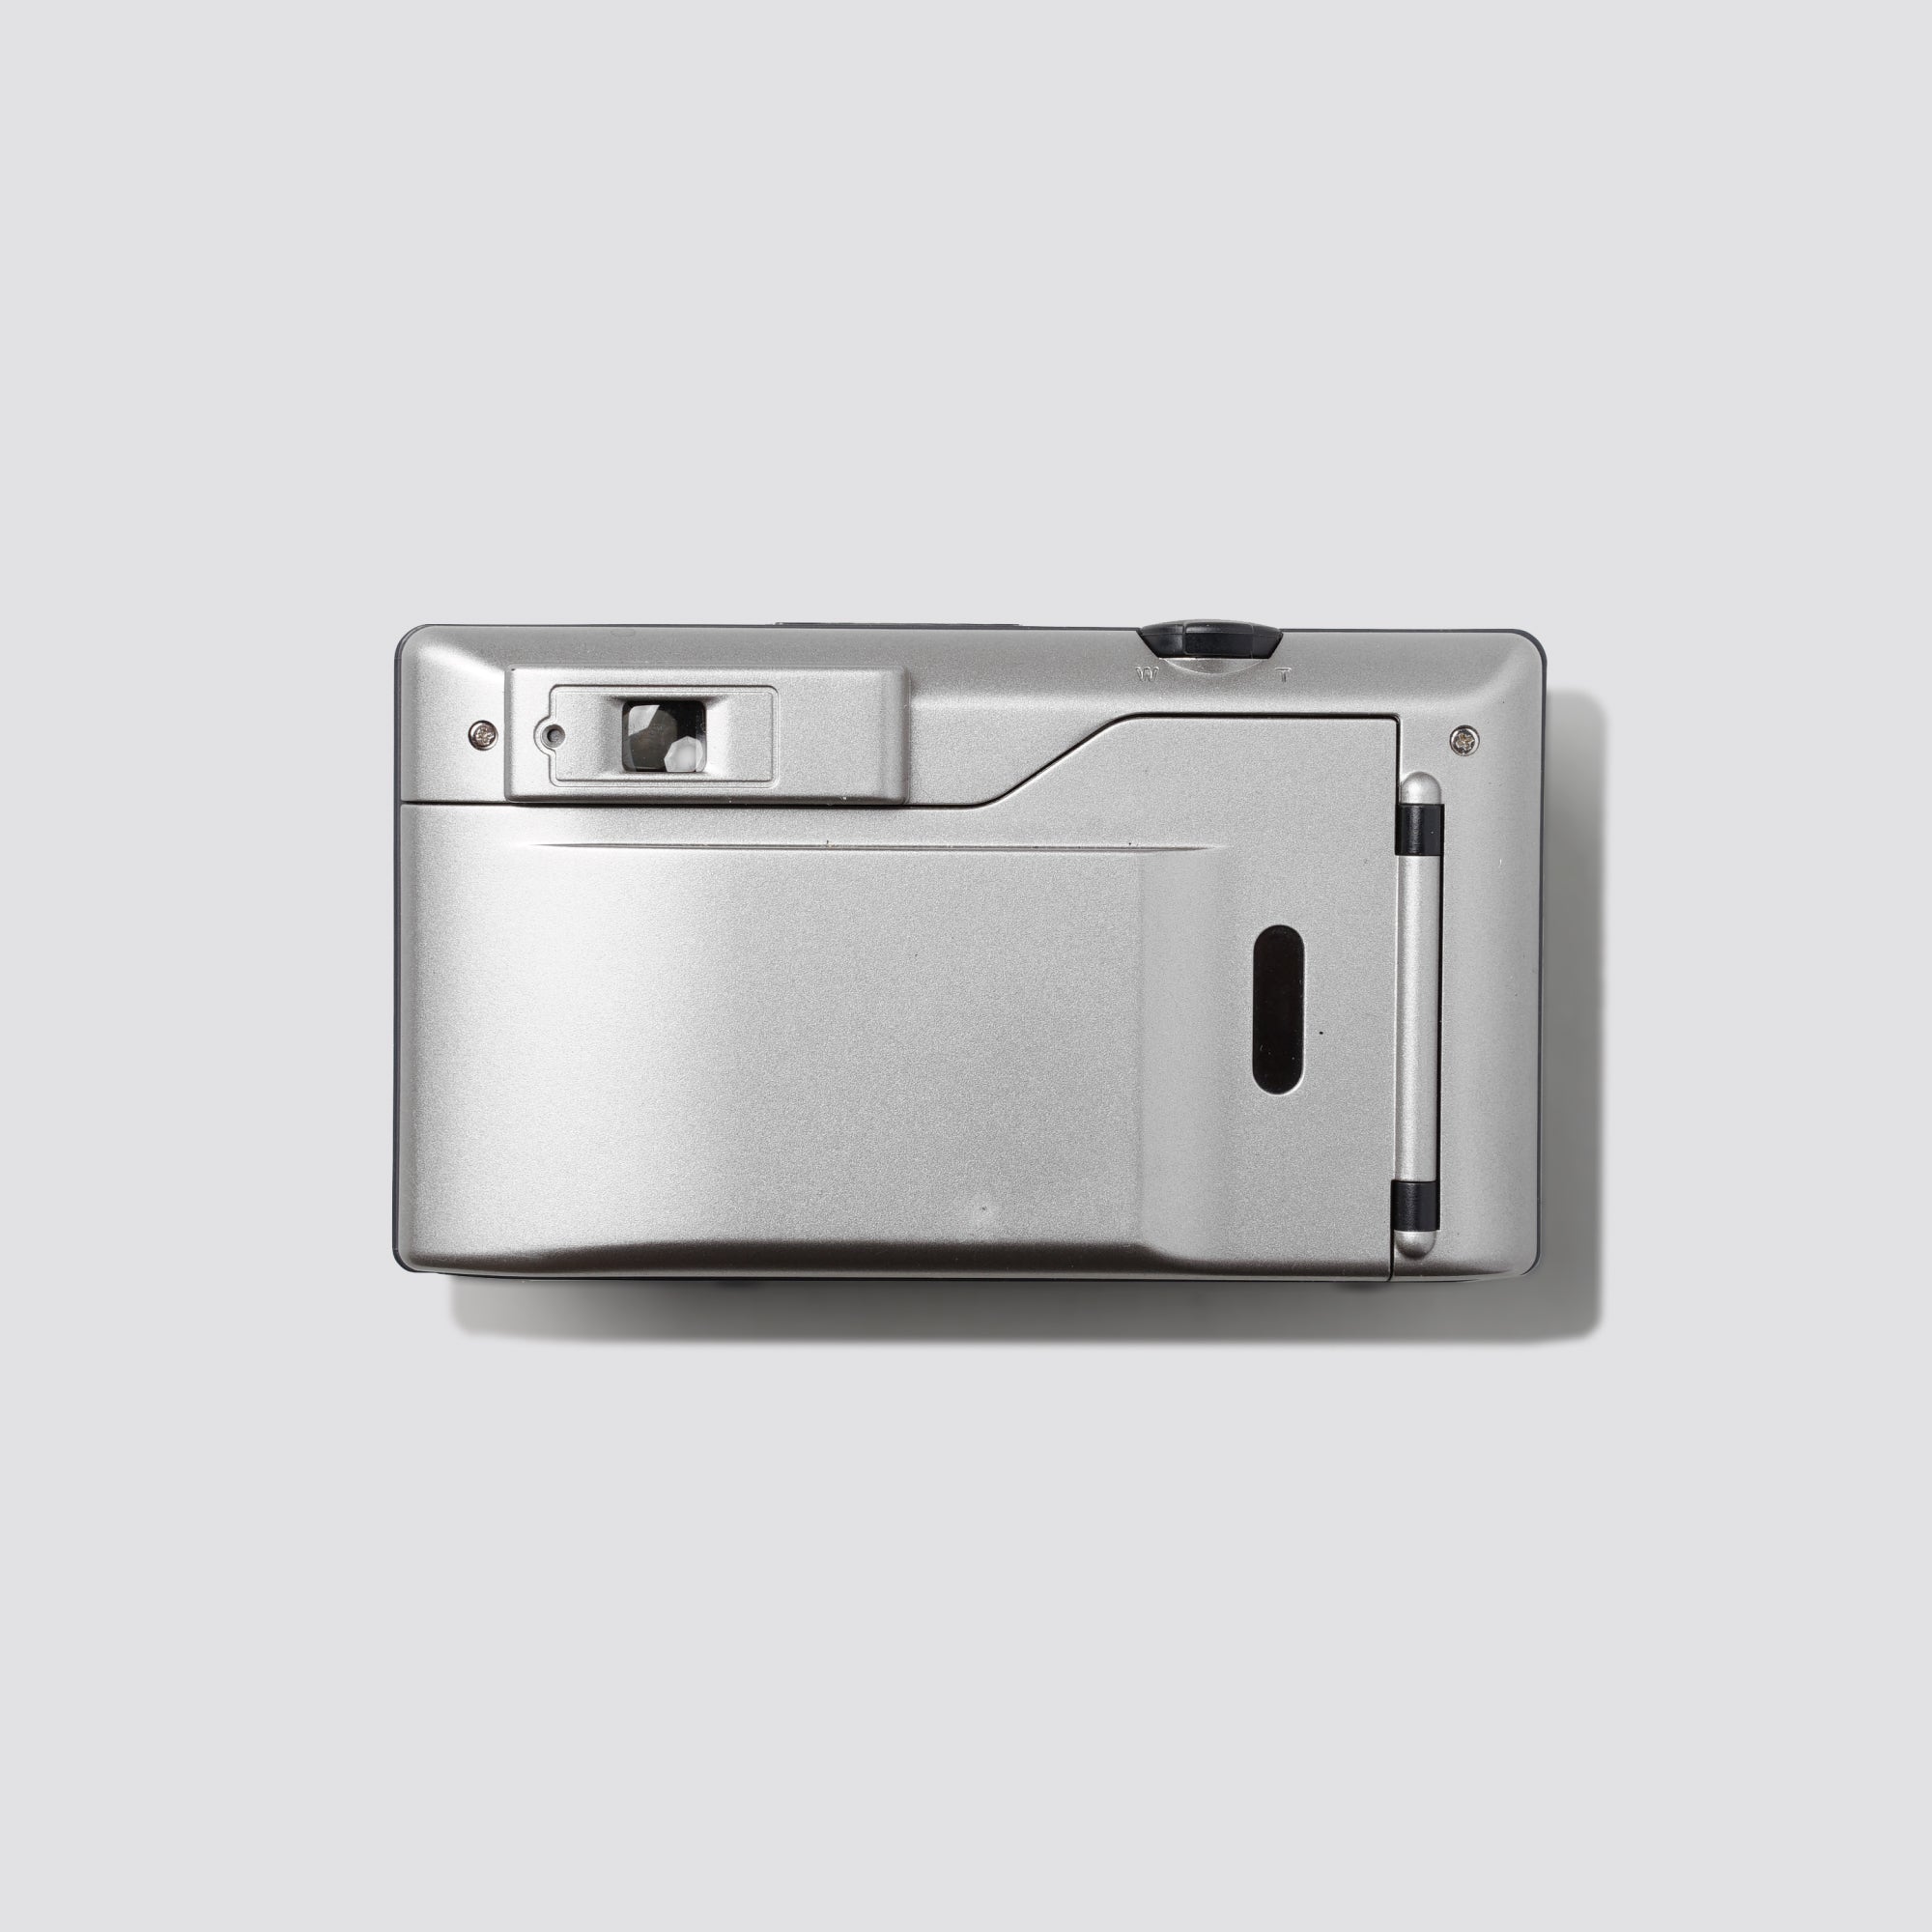 Buy Konica Z-up 110VP now at Analogue Amsterdam